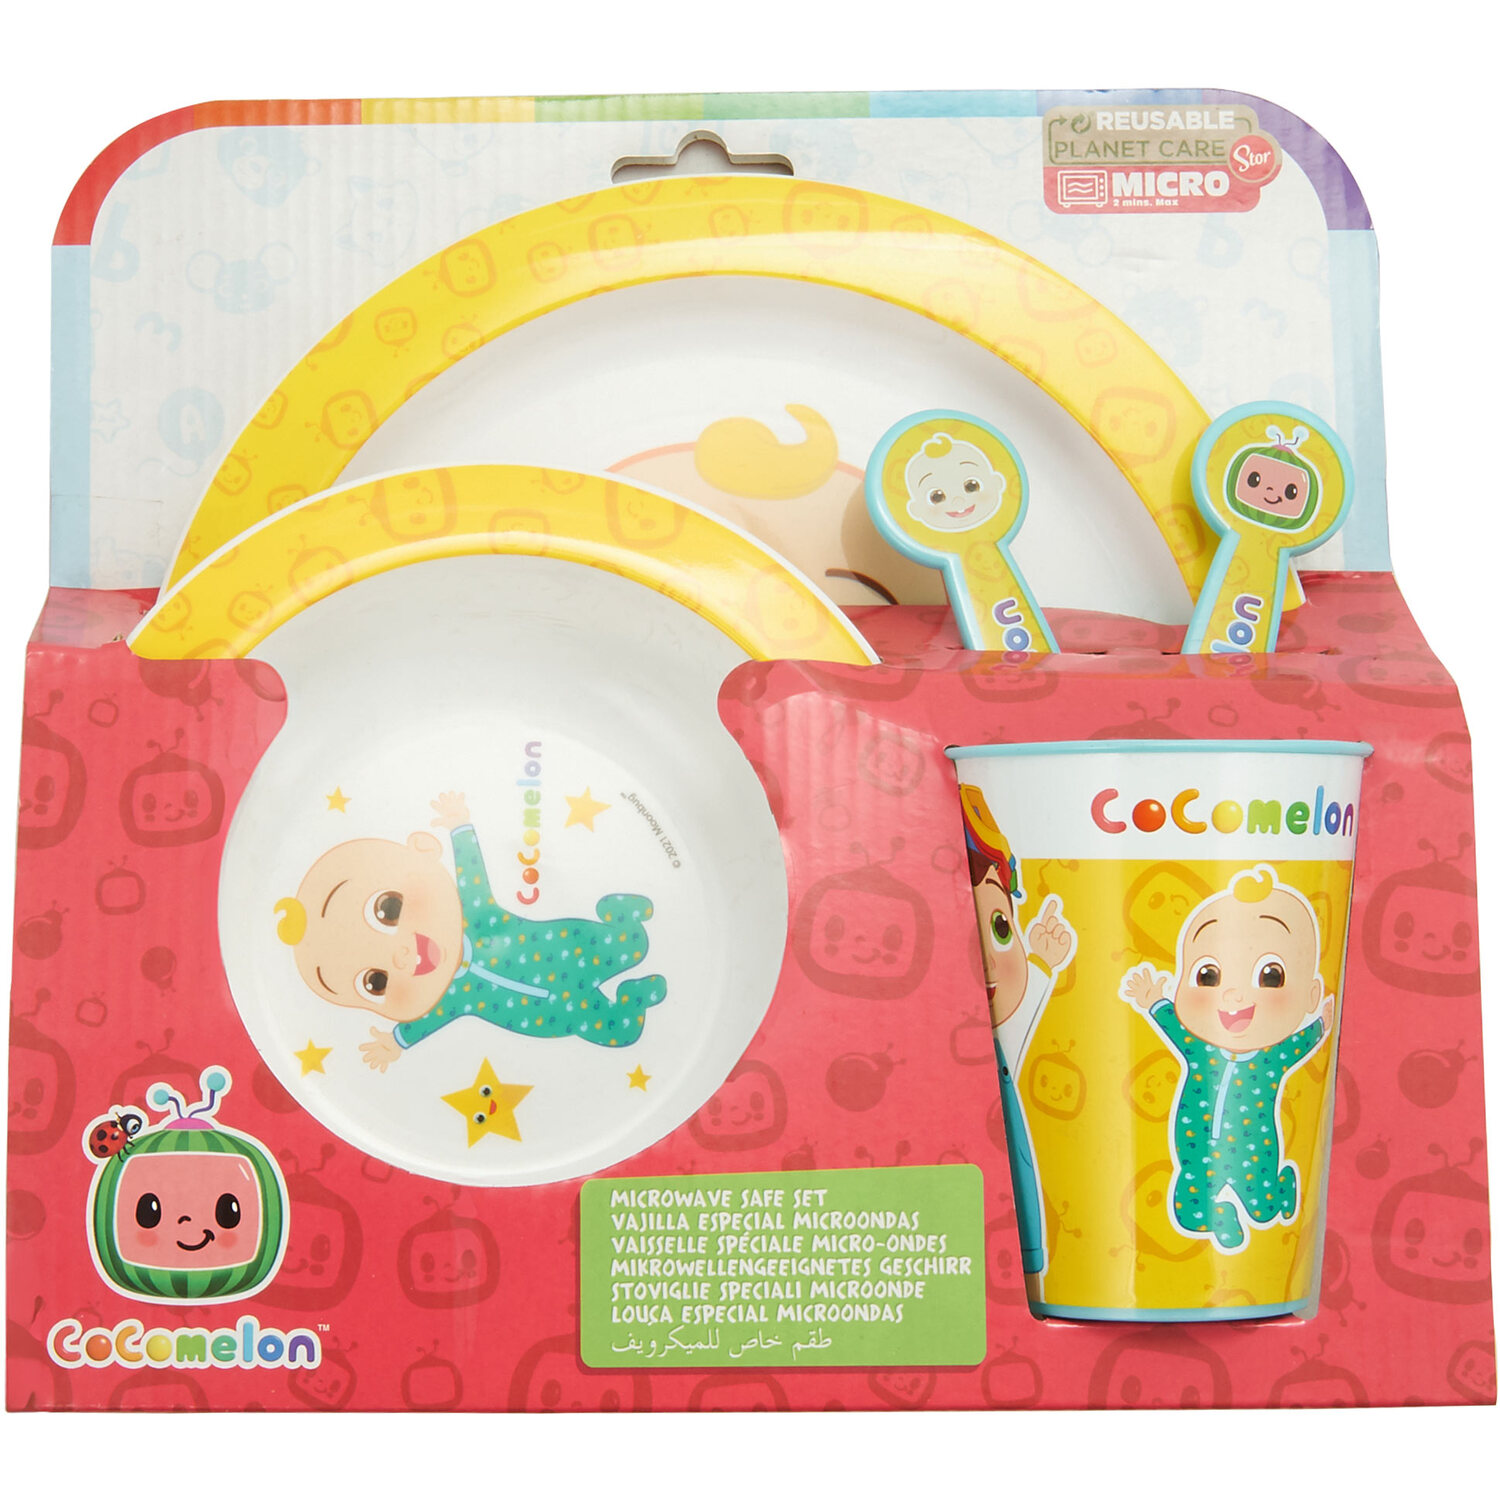 5-Piece Cocomelon Dinner Set - Yellow Image 1